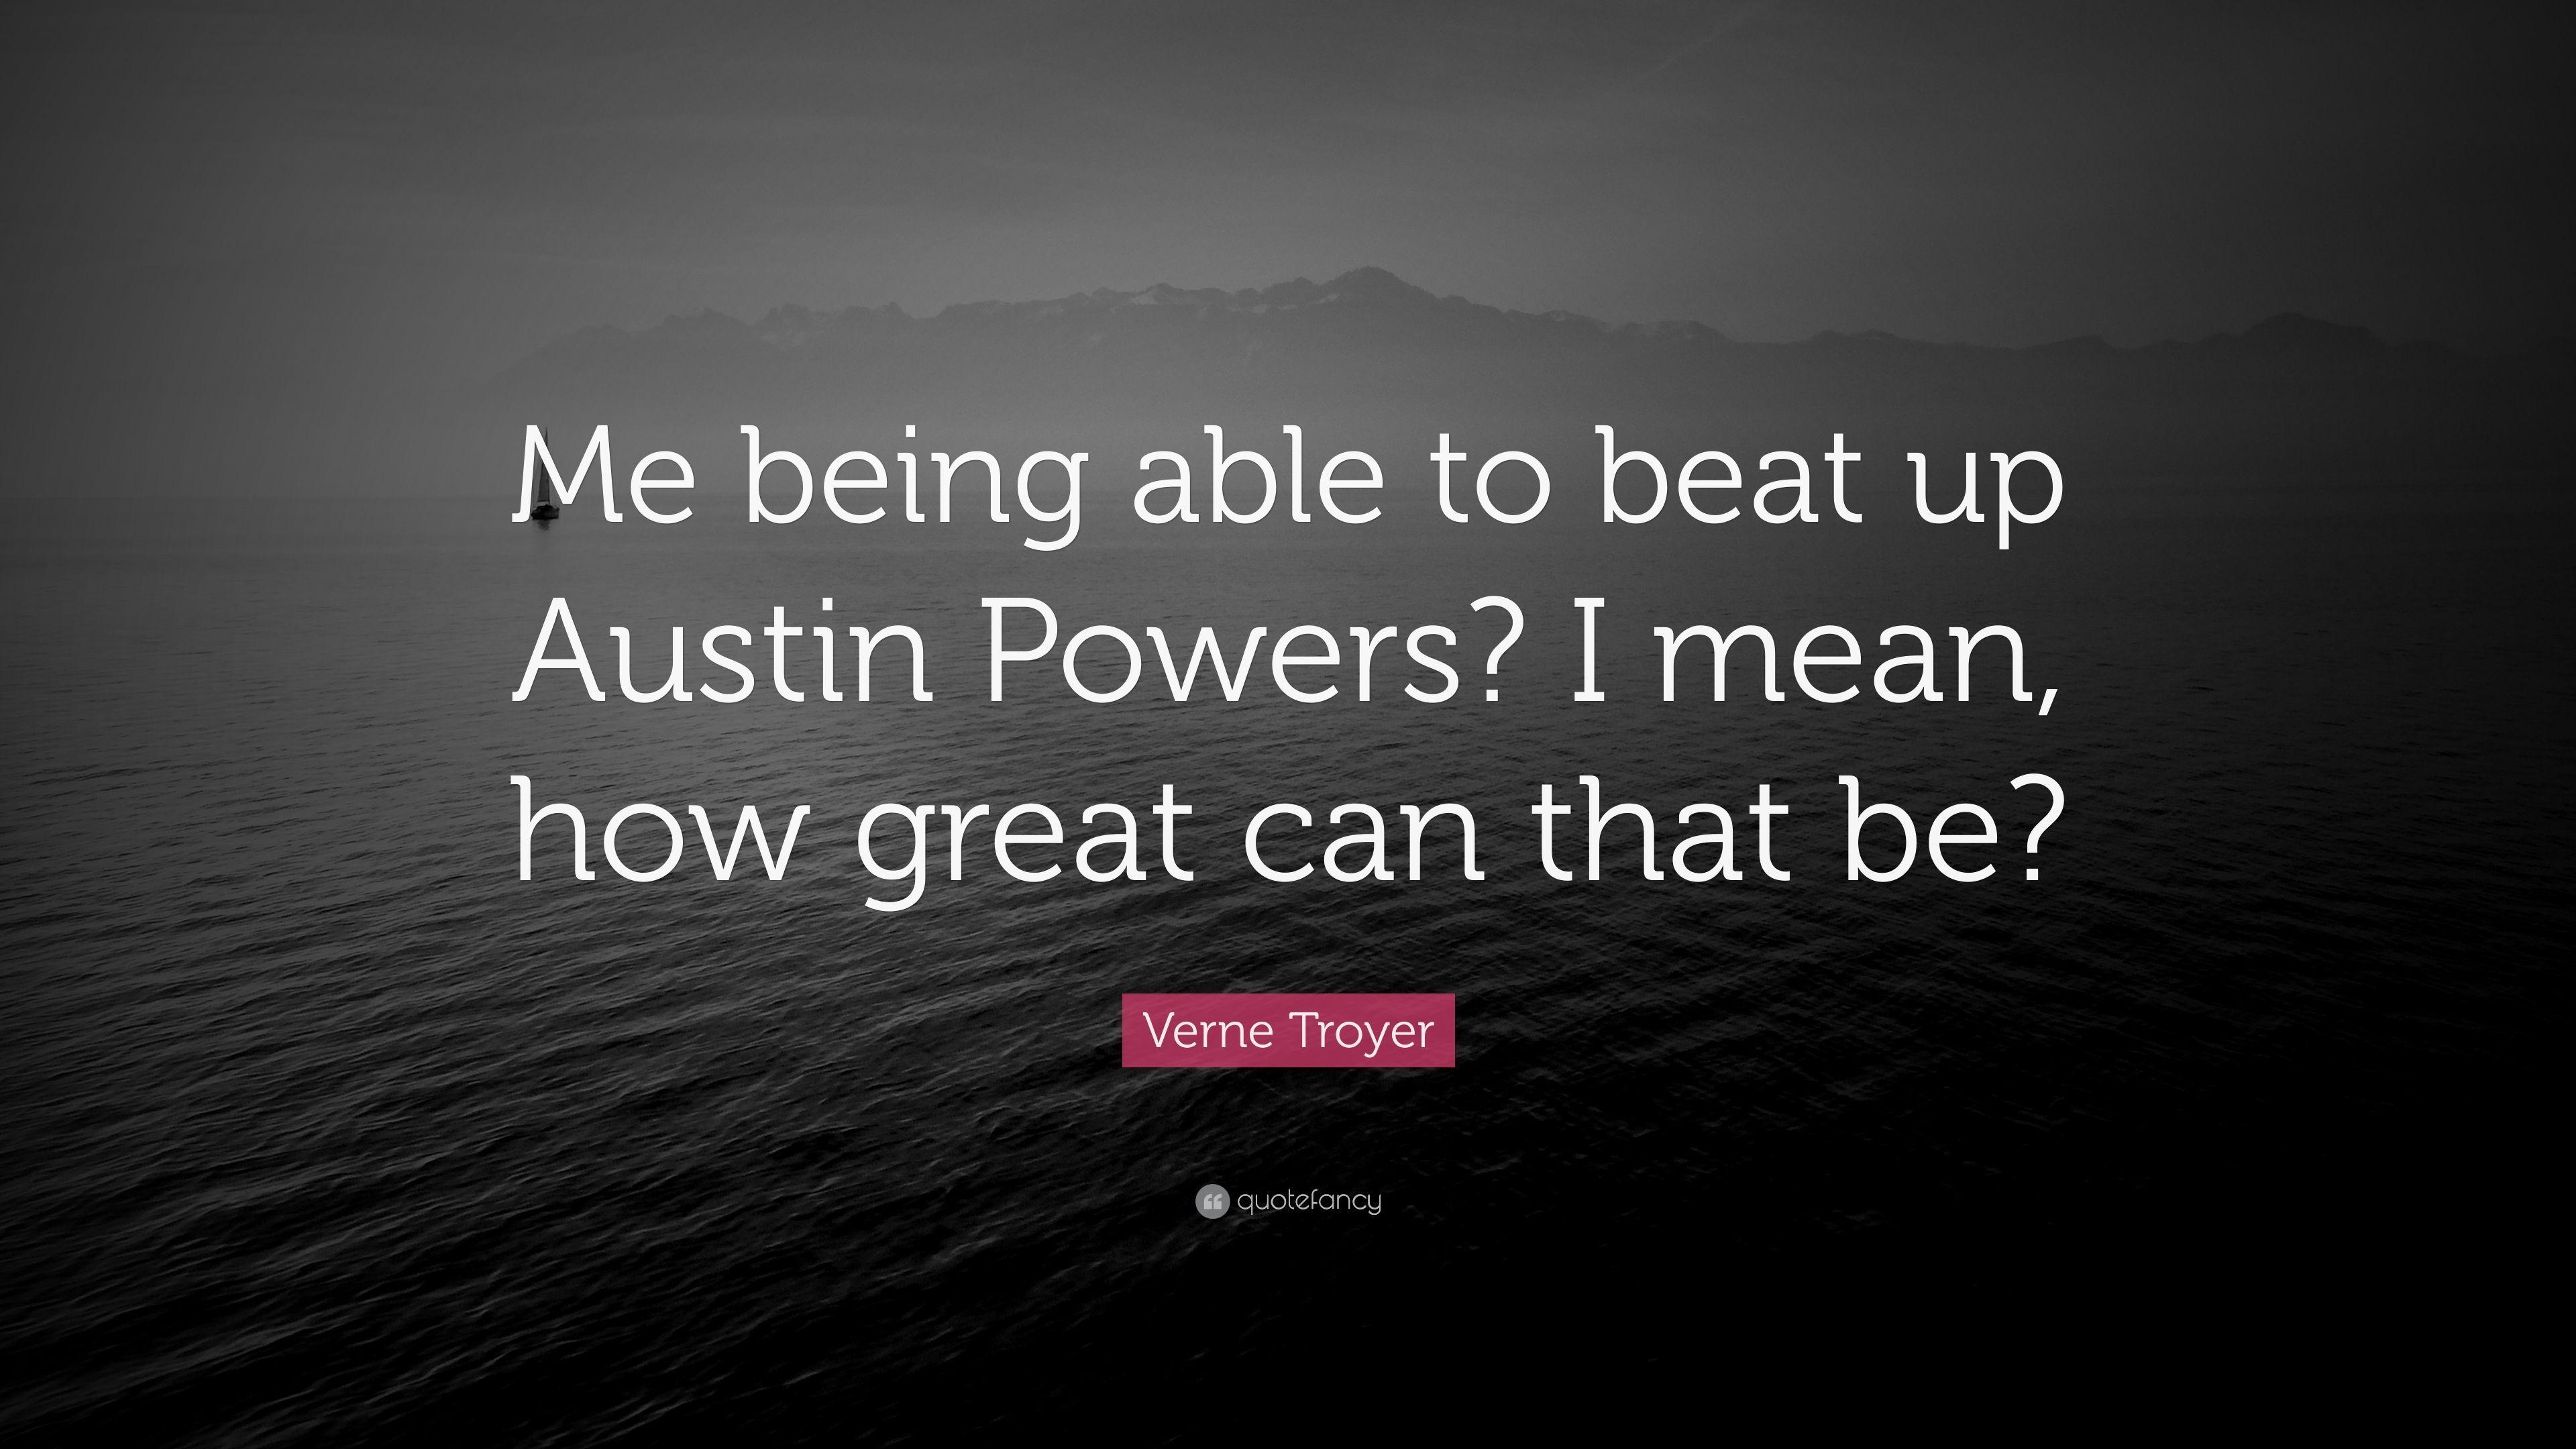 Verne Troyer Quote: “Me being able to beat up Austin Powers? I